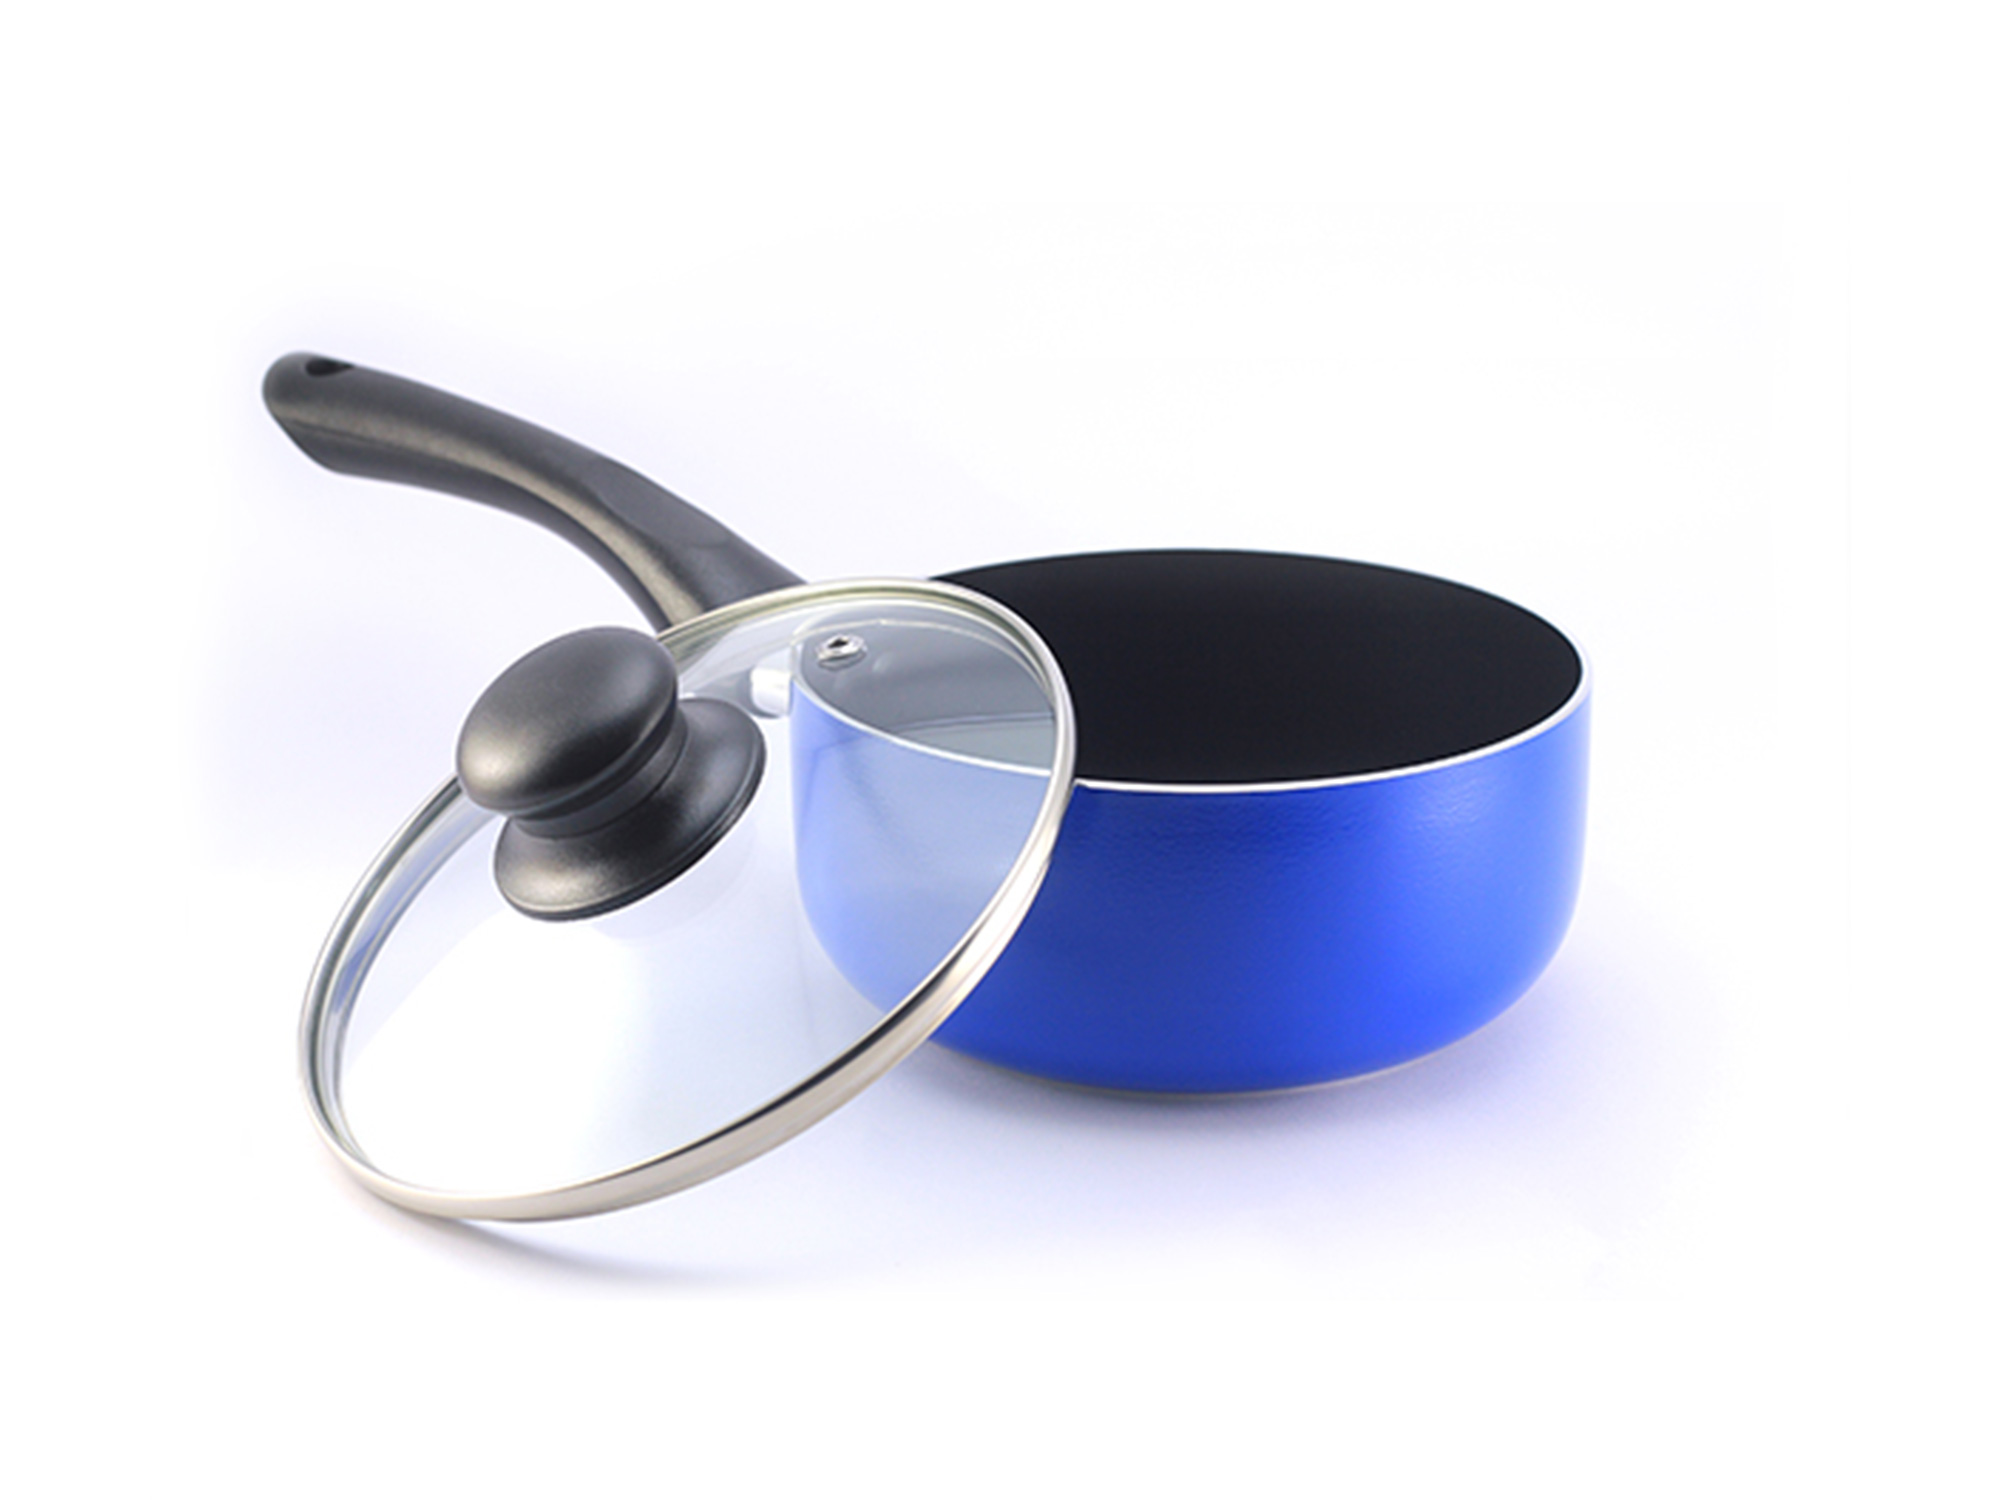 What Other Cookware Coatings Are There Besides Teflon?